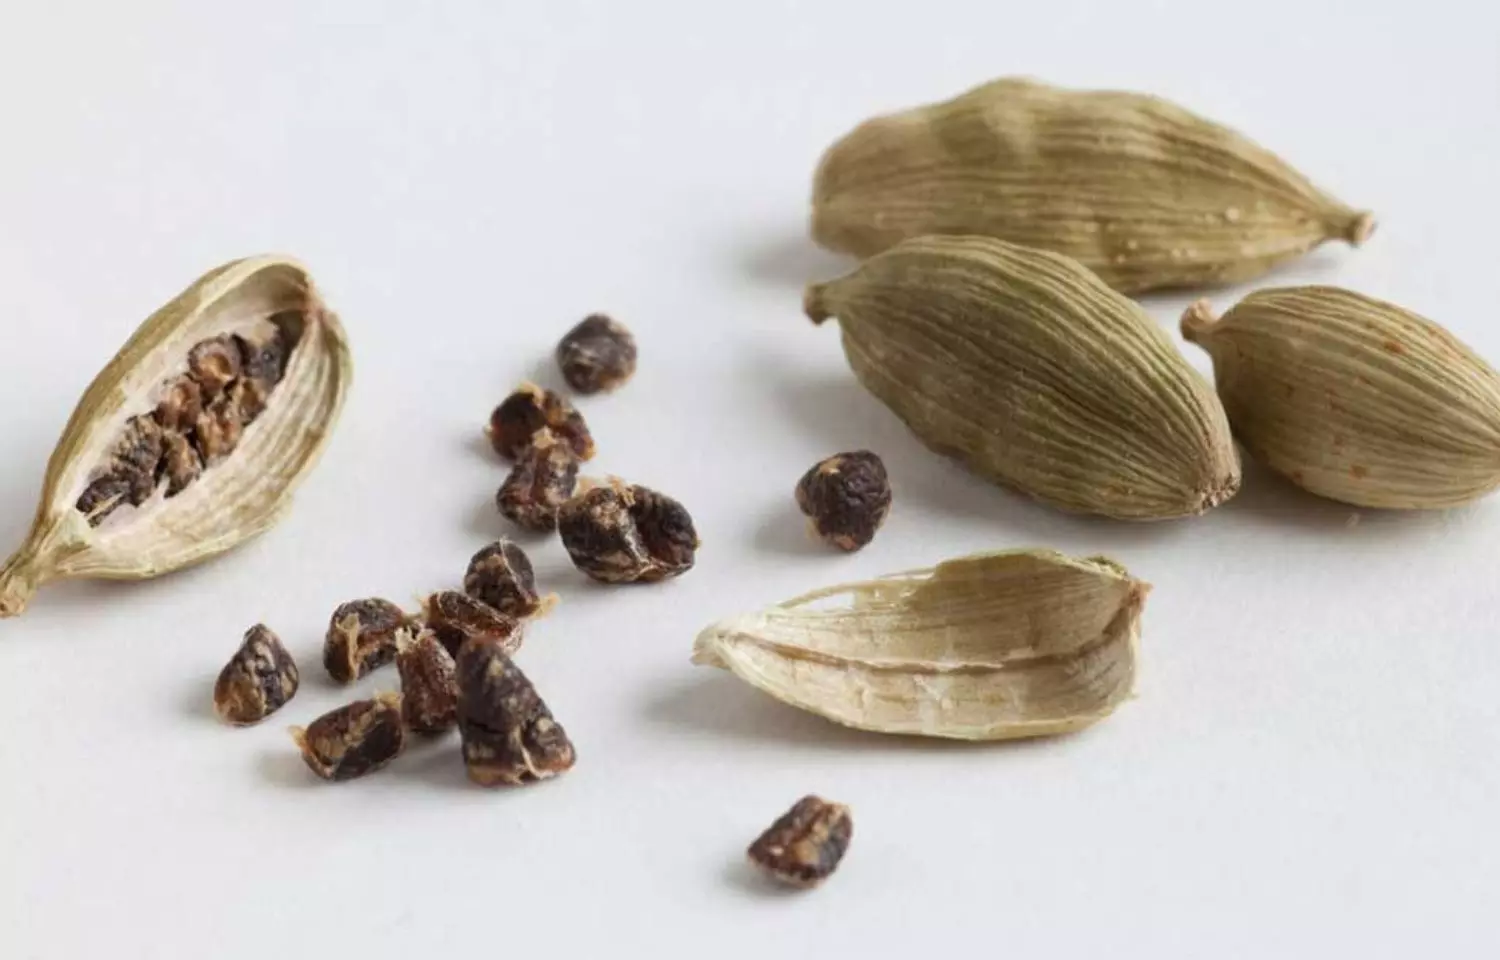 Cardamom good for glucose metabolism, lowers HbA1C, finds study